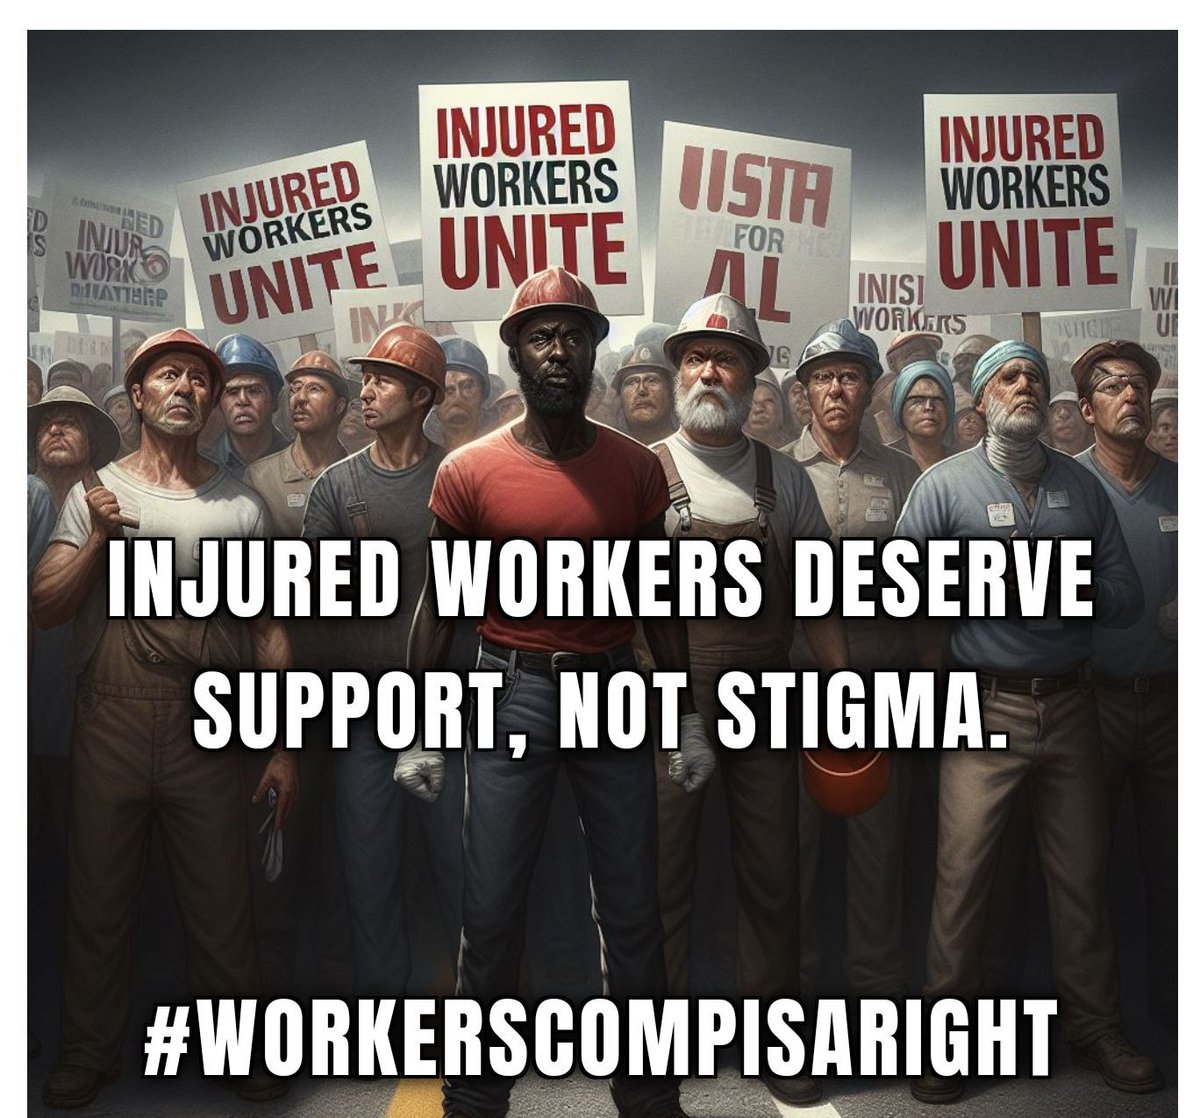 Injured workers deserve support, not stigma. Let's stand together to end the stigma and ensure fair treatment for all. #WorkersCompIsARight #SupportNotStigma #InjuredWorkers